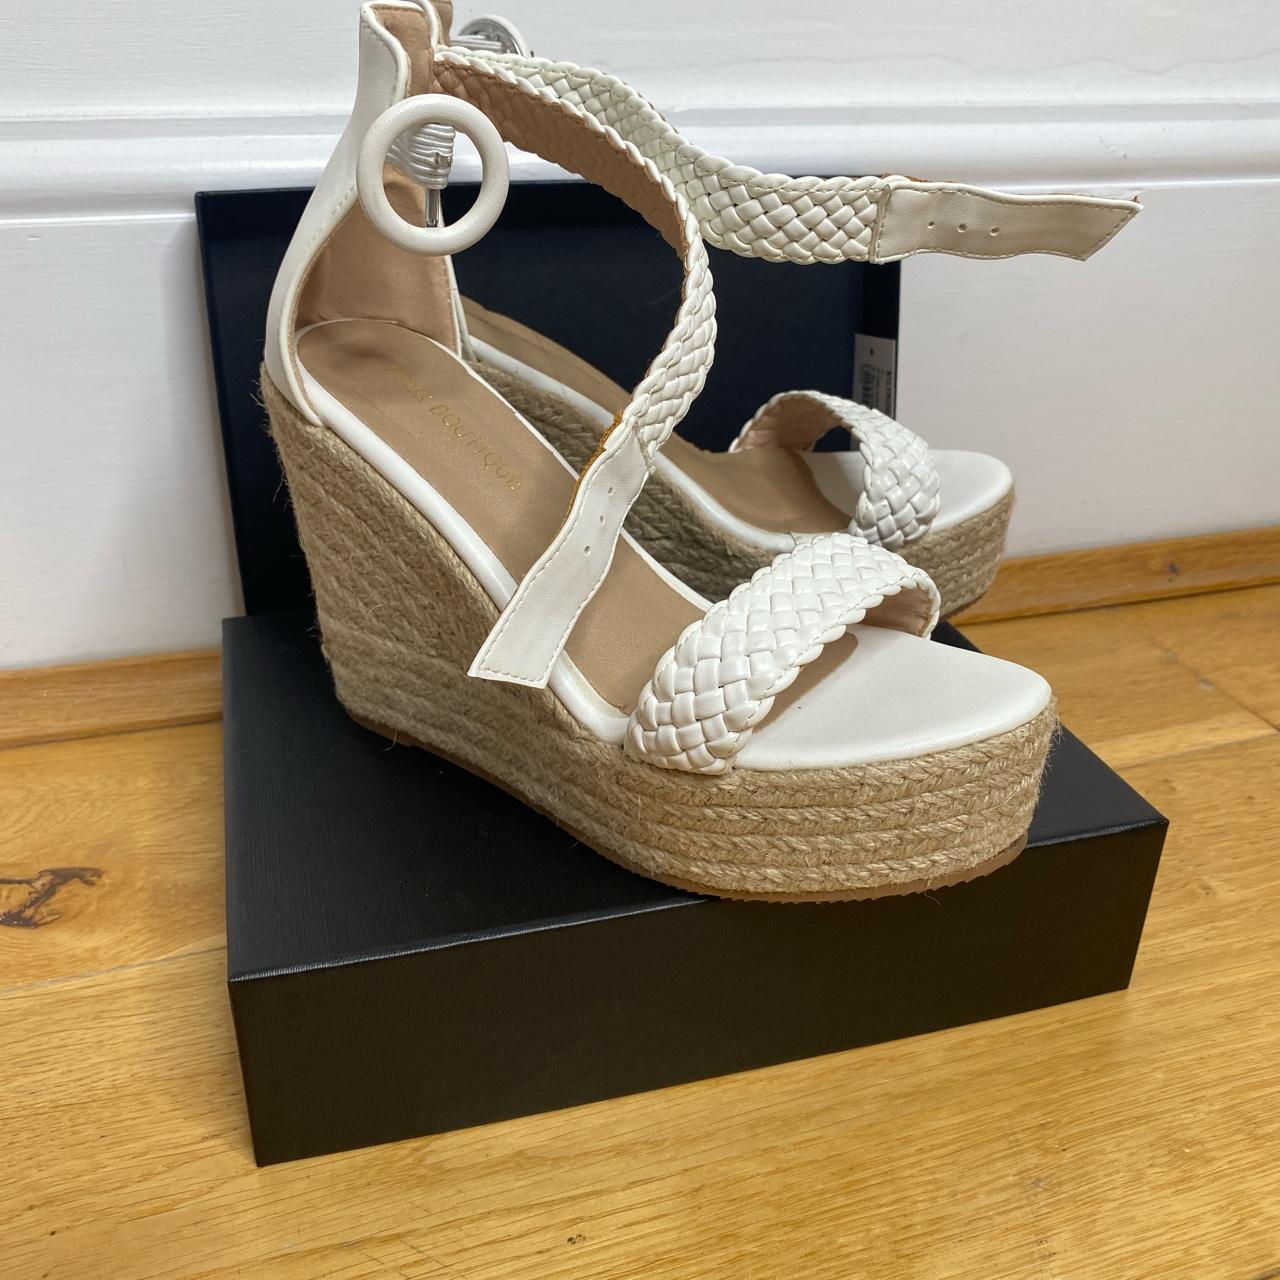 White wedges. Never been worn before #white #wedges - Depop